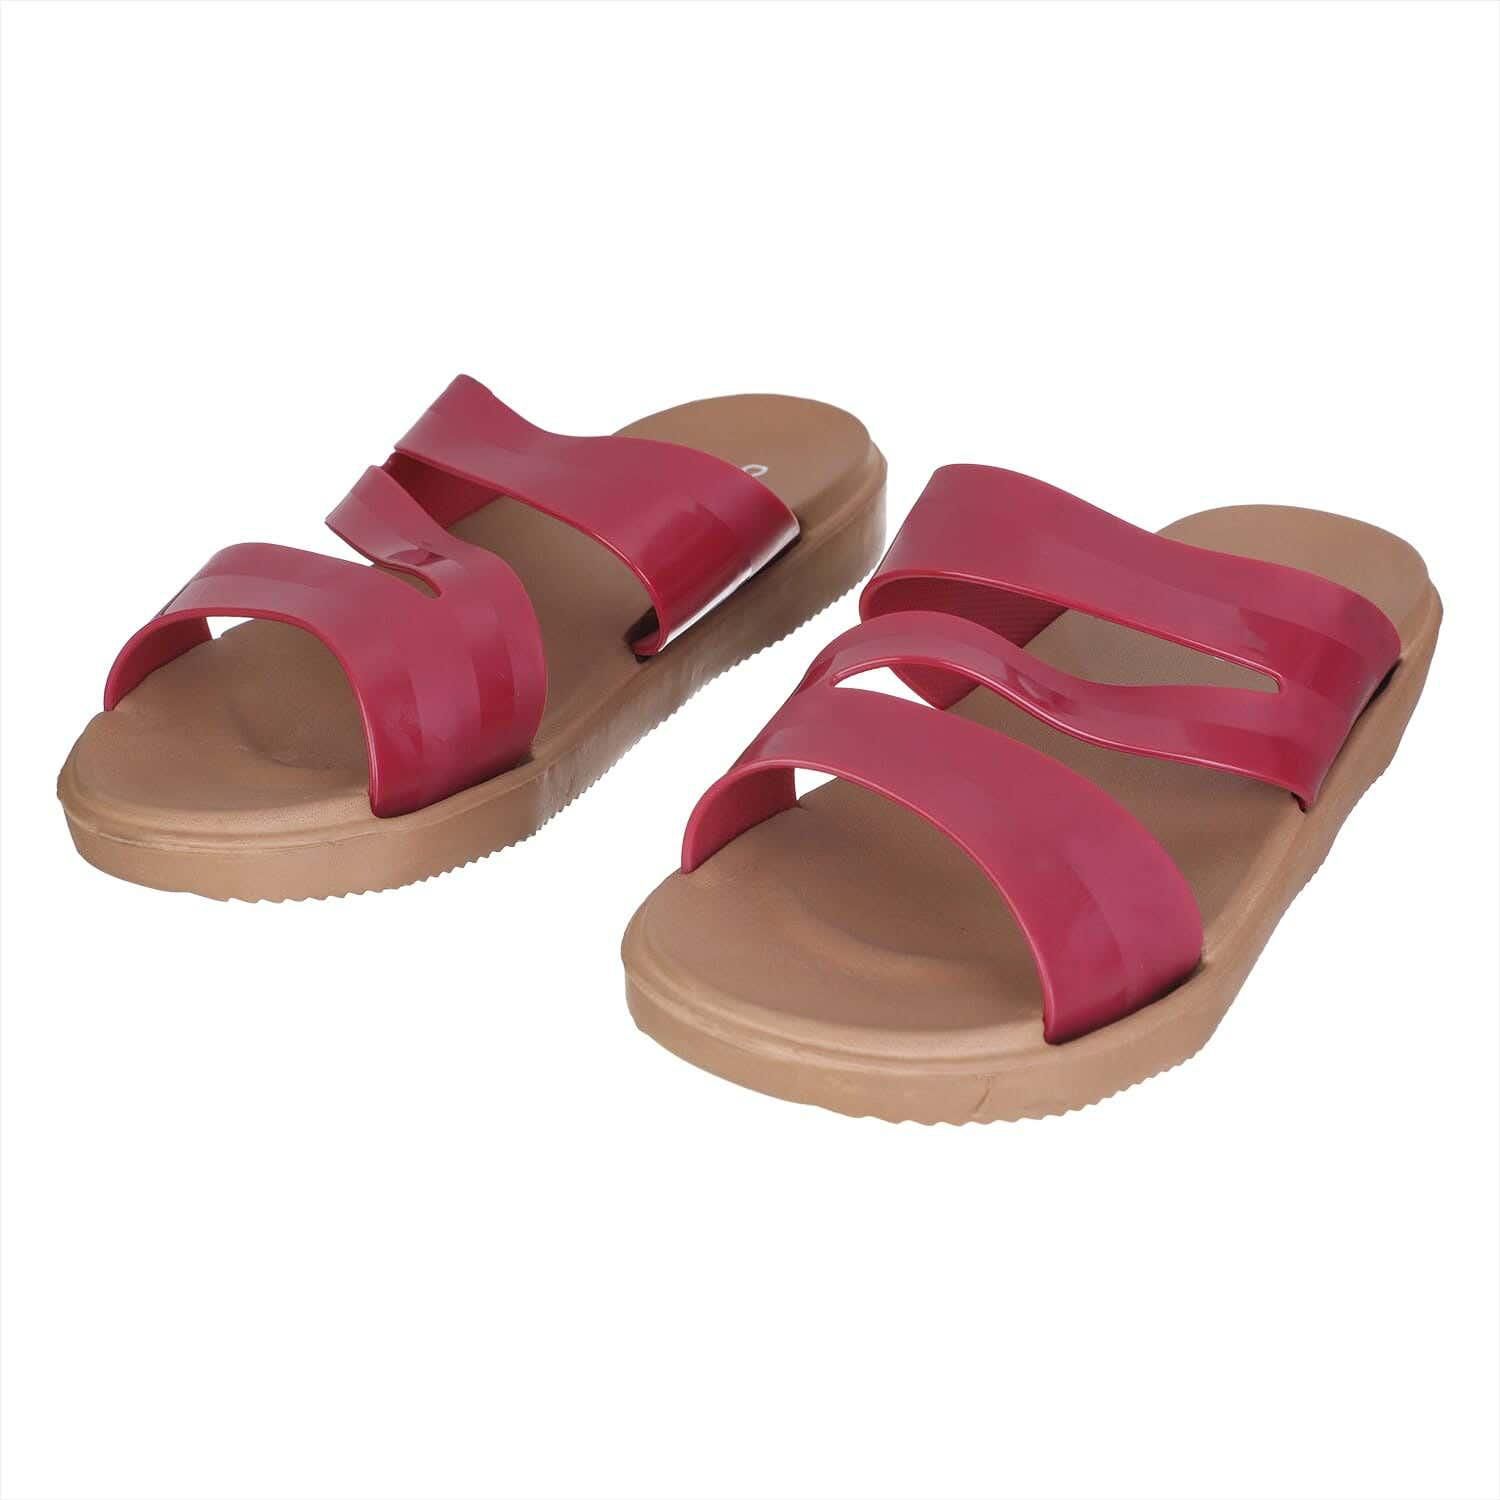 Get Rubber Slippers for Women with best offers | Raneen.com